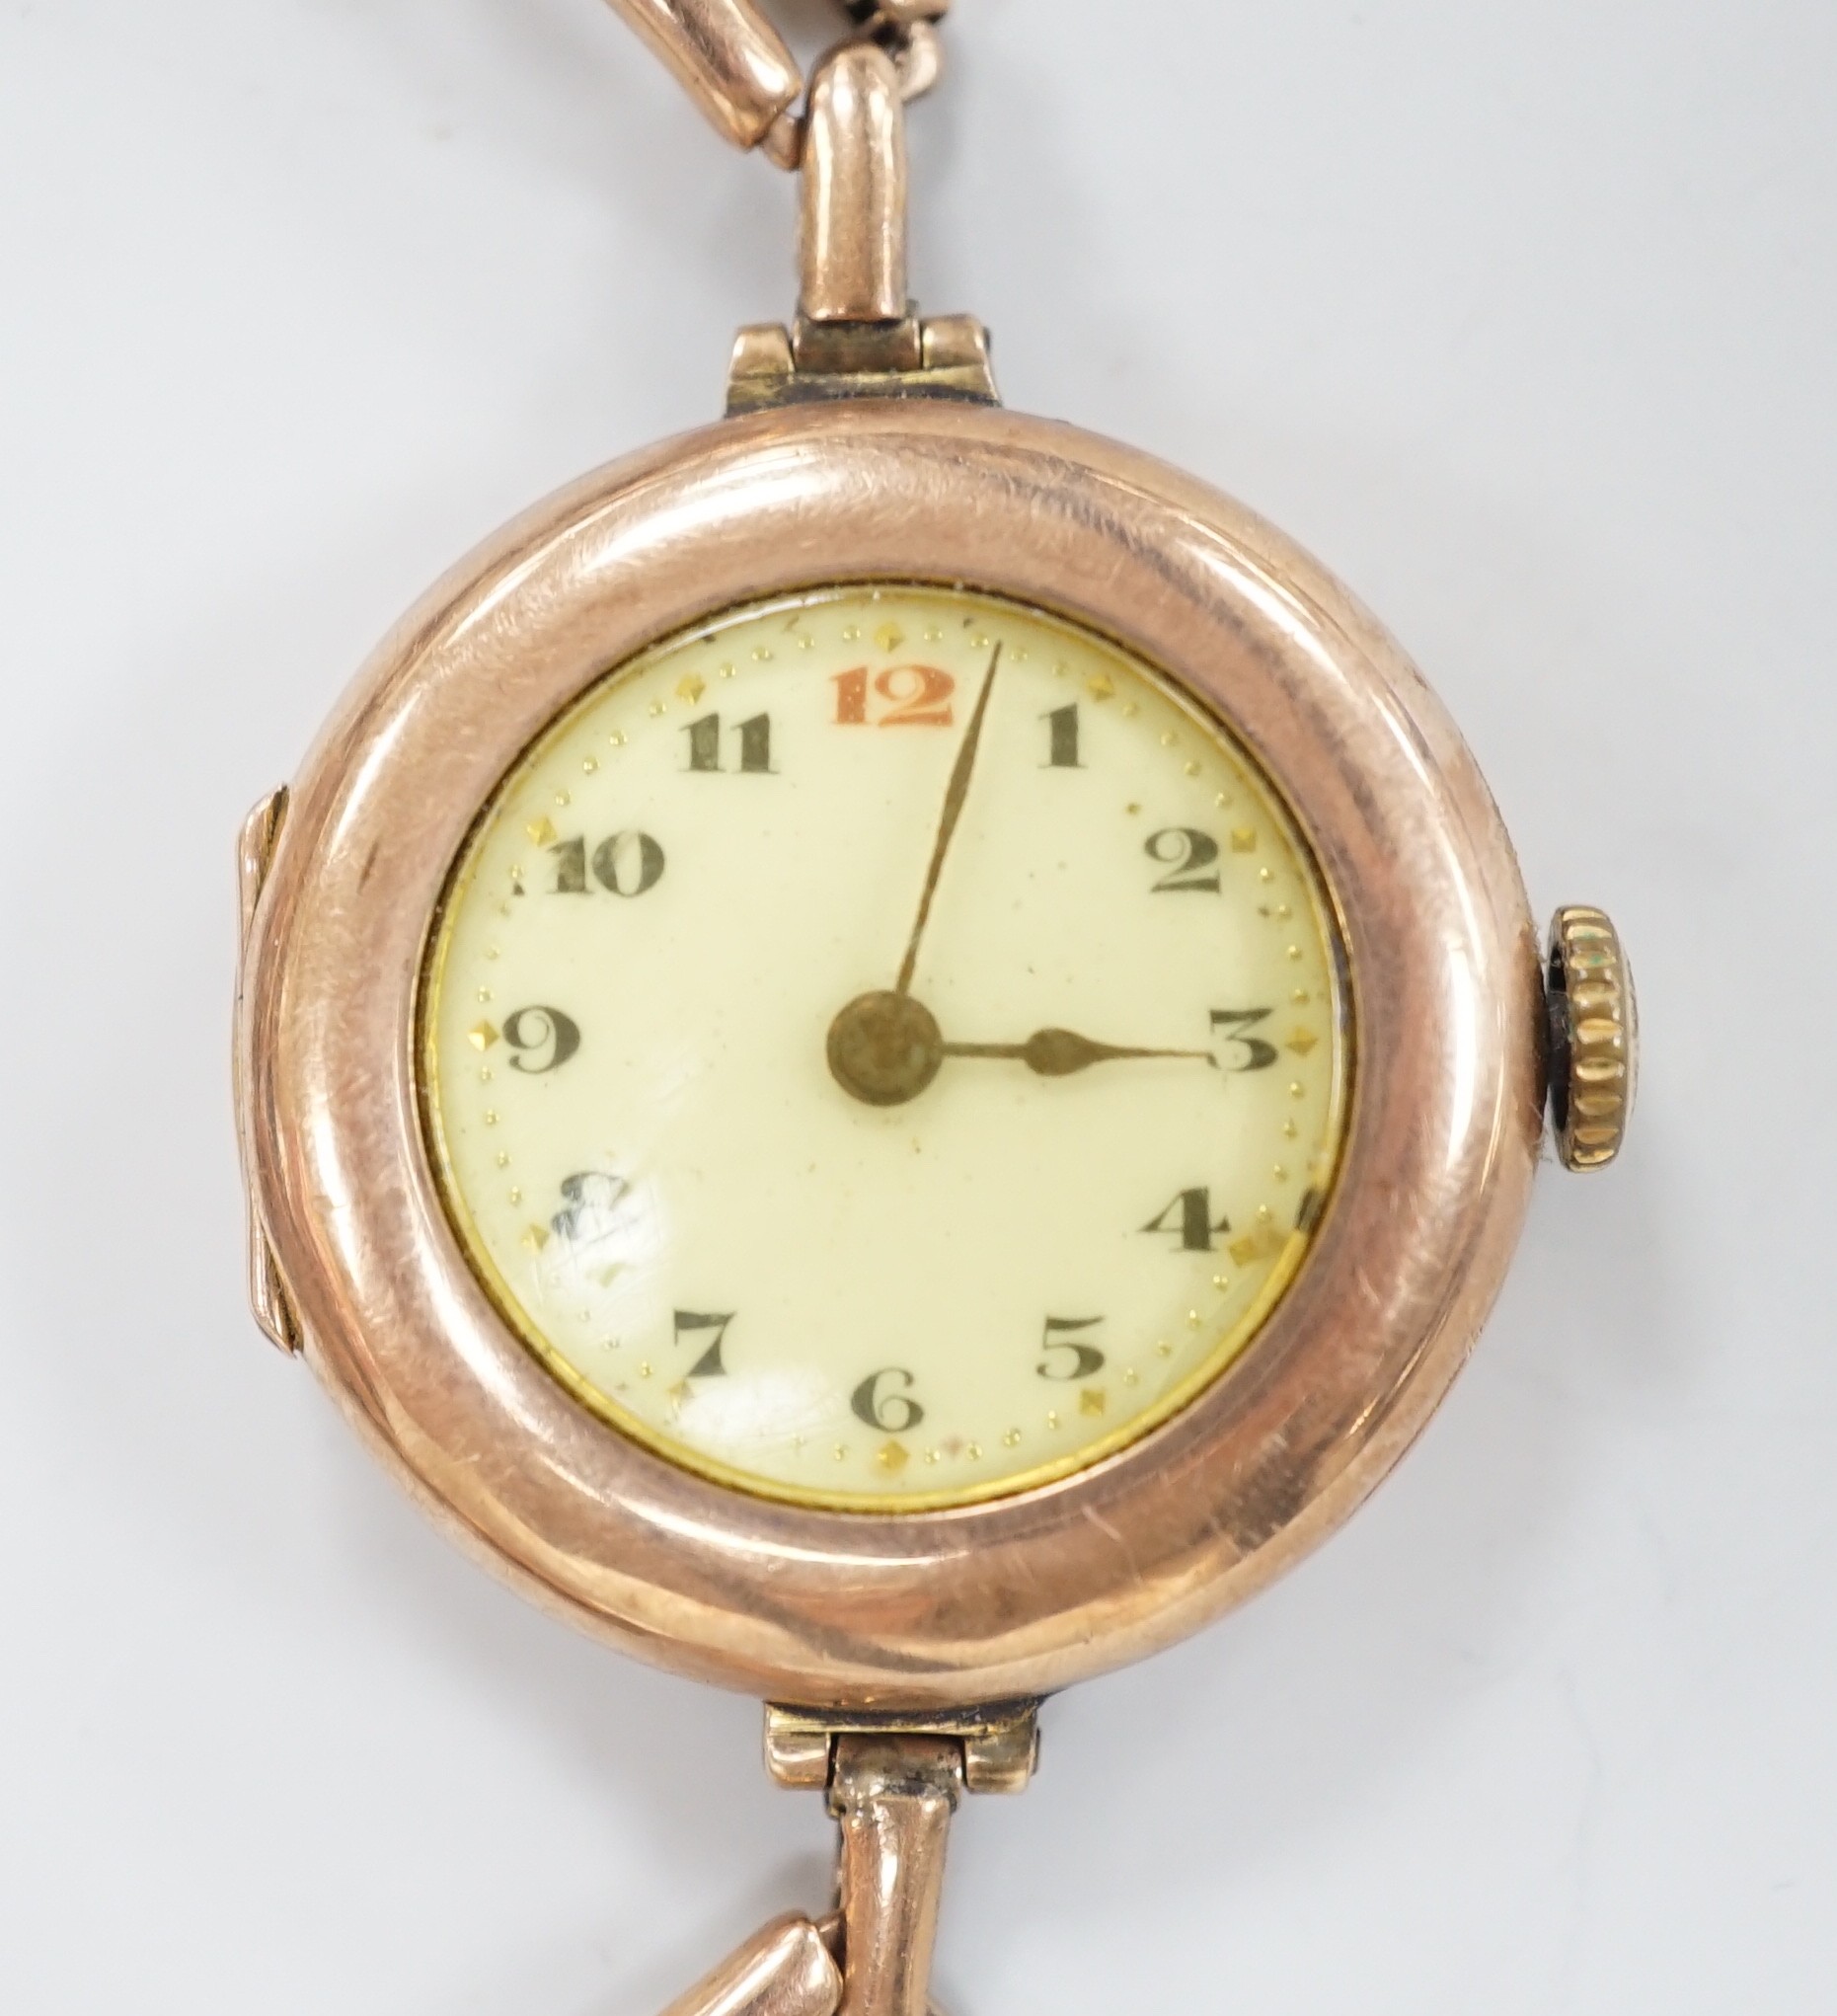 An early 20th century 9ct gold Rolex manual wind wrist watch, with Arabic dial, case diameter 27mm, on an expanding yellow metal bracelet, gross weight 22.1 grams.